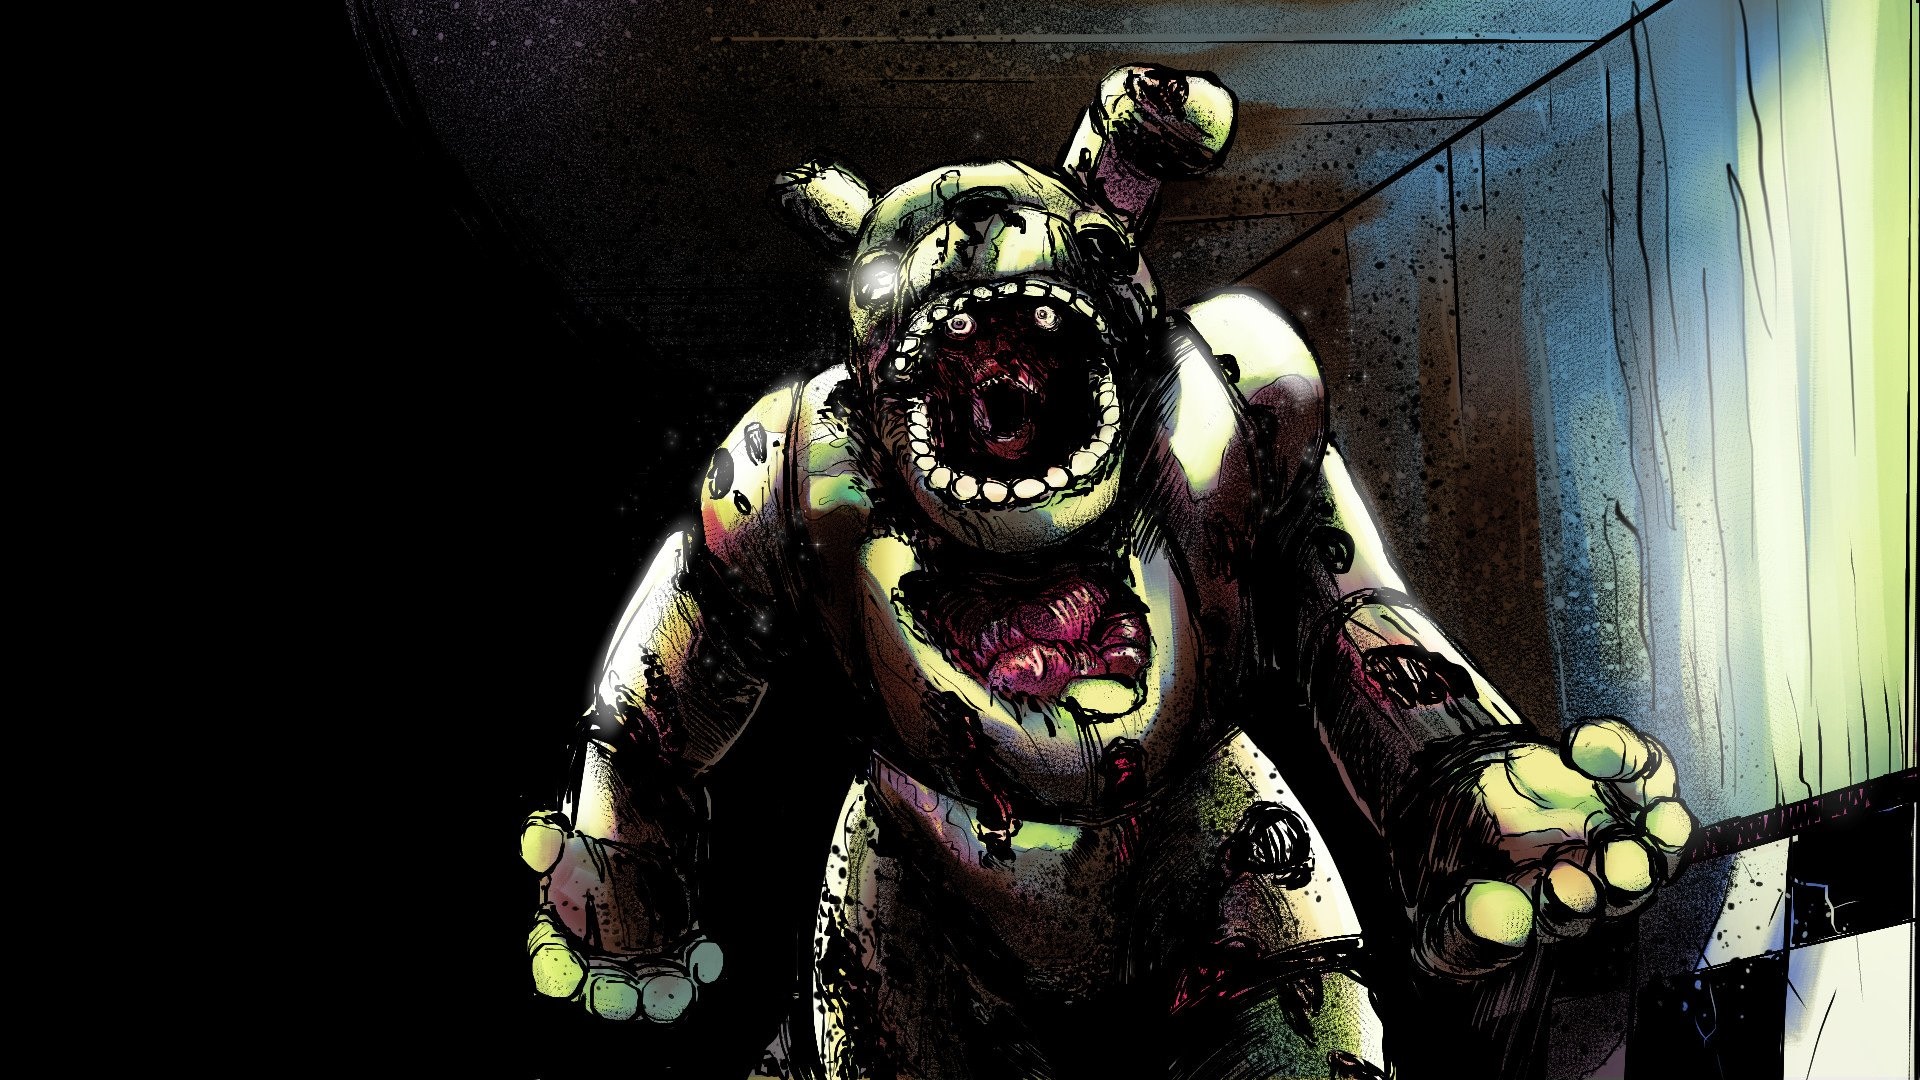 Five nights at freddys springtrap. Five Nights at Freddy's СПРИНГТРАП. Five Nights at Freddy's 3 СПРИНГТРАП. Пять ночей с Фредди 3 СПРИНГТРАП. СПРИНГТРАП ФНАФ.